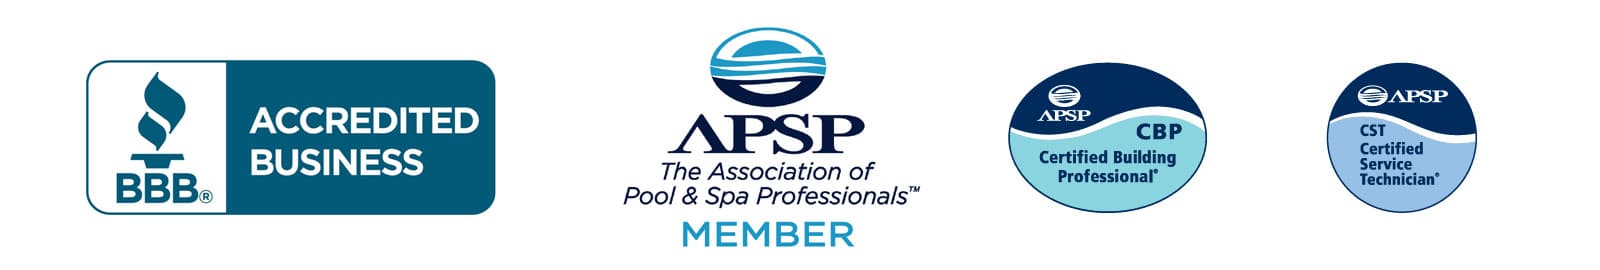 Swim World Pools APSP Certifications logos and BBB Accreditation